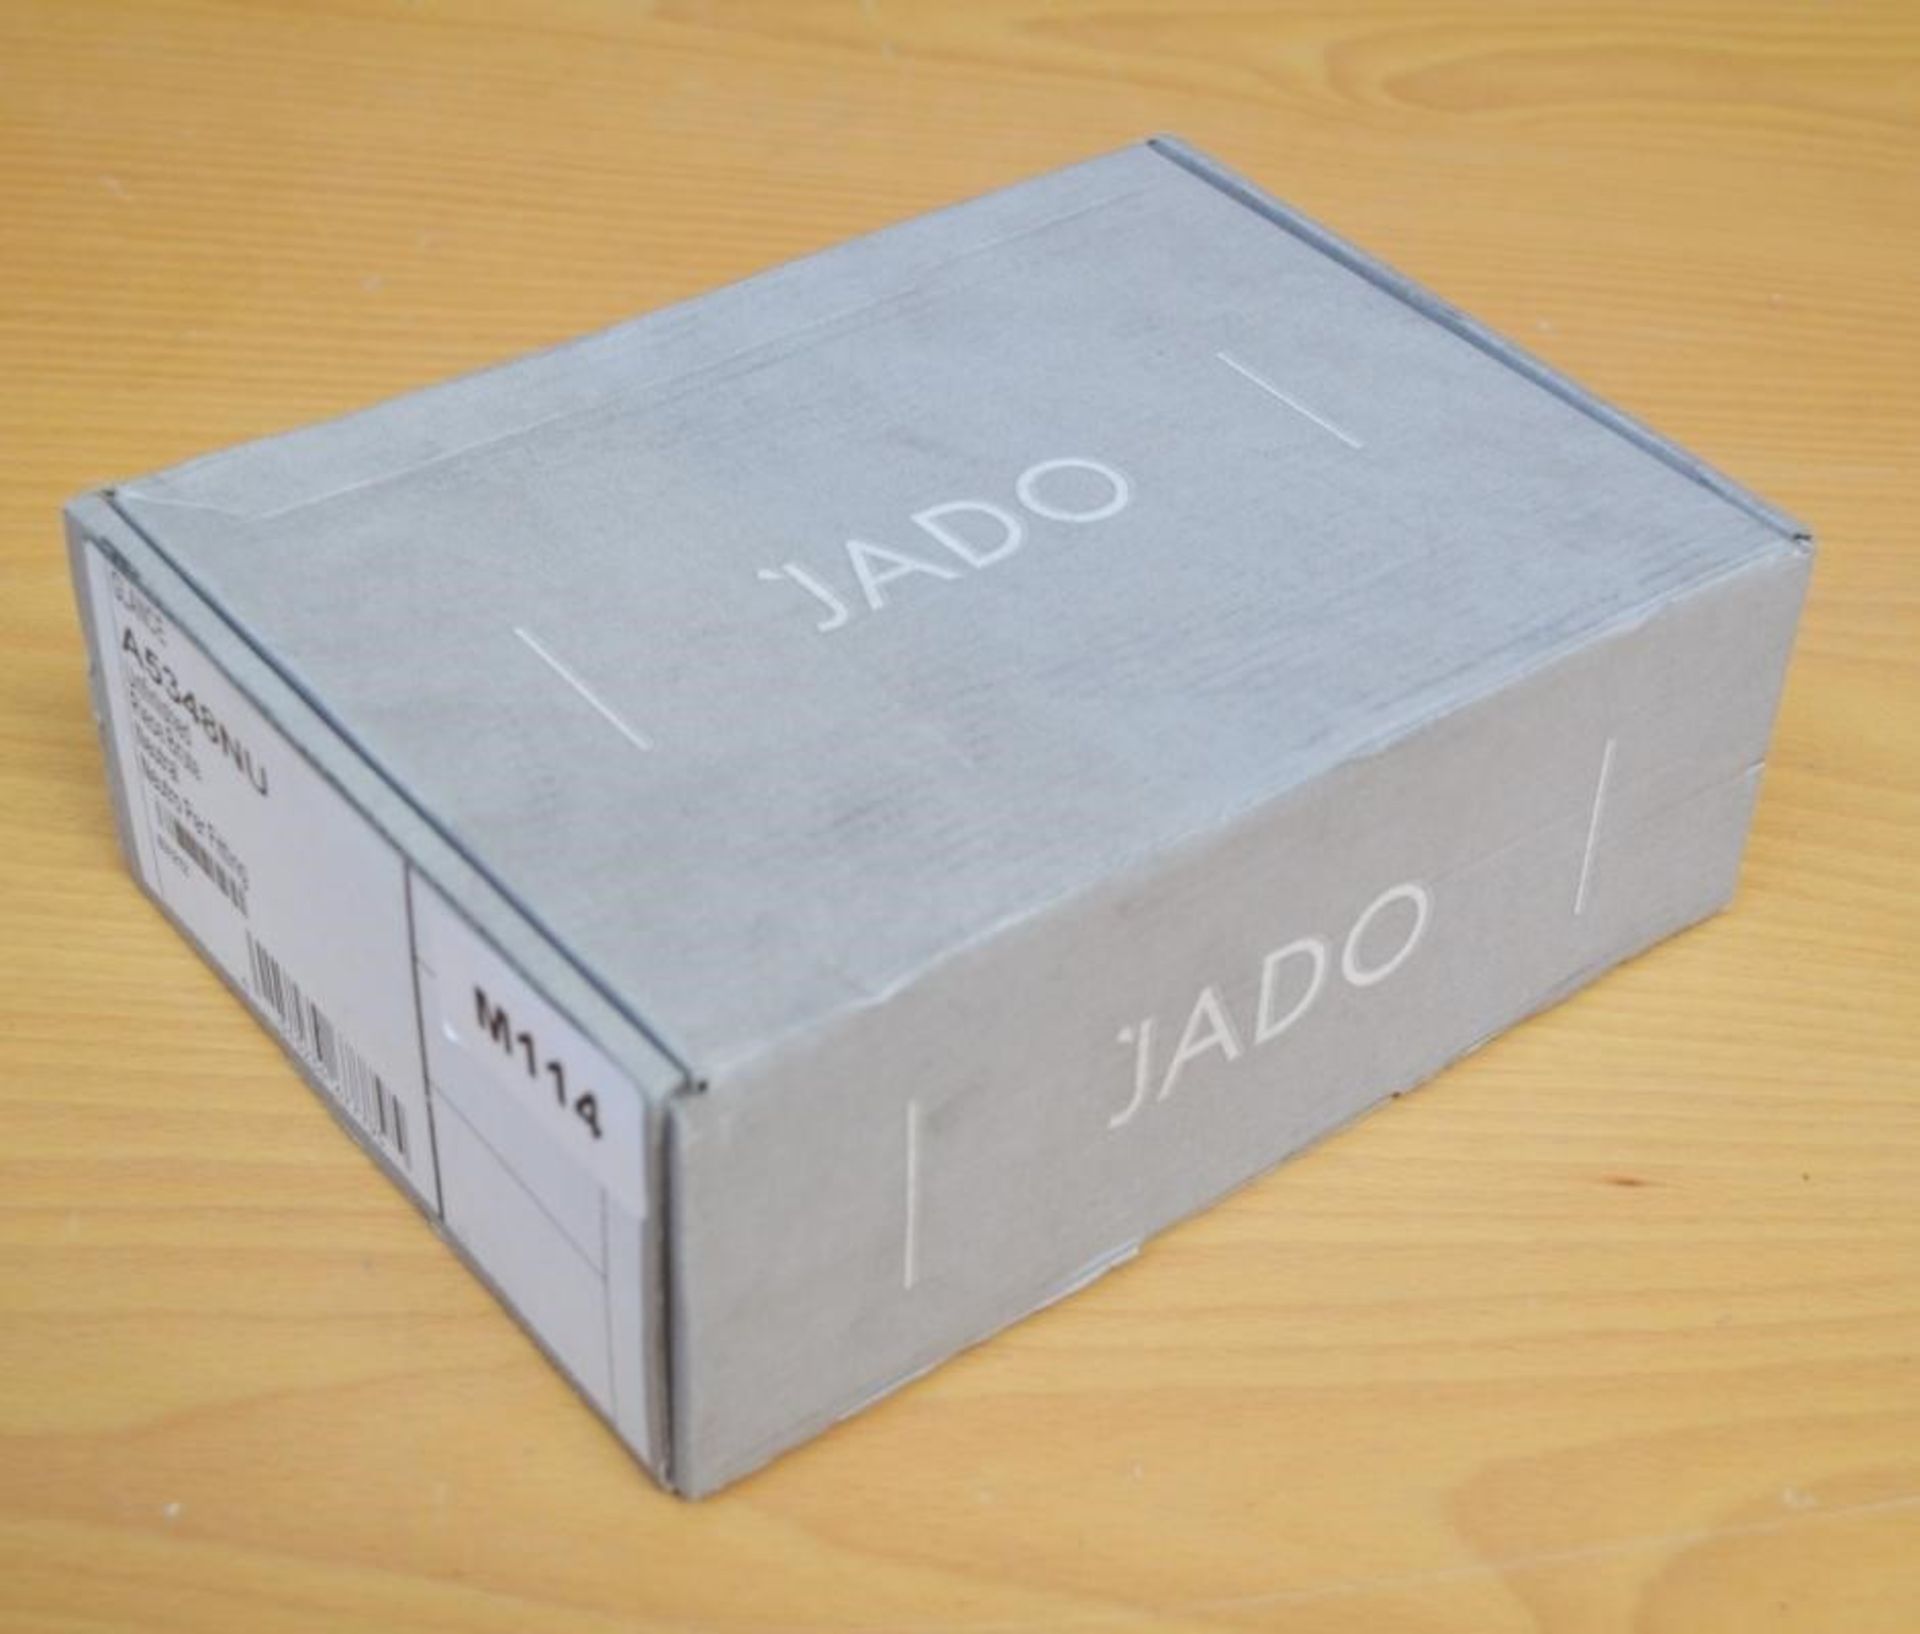 1 x Ideal Standard JADO "Glance" Concealed Parts (A5348NU) - Chrome Finish - New / Unused Boxed Stoc - Image 6 of 8